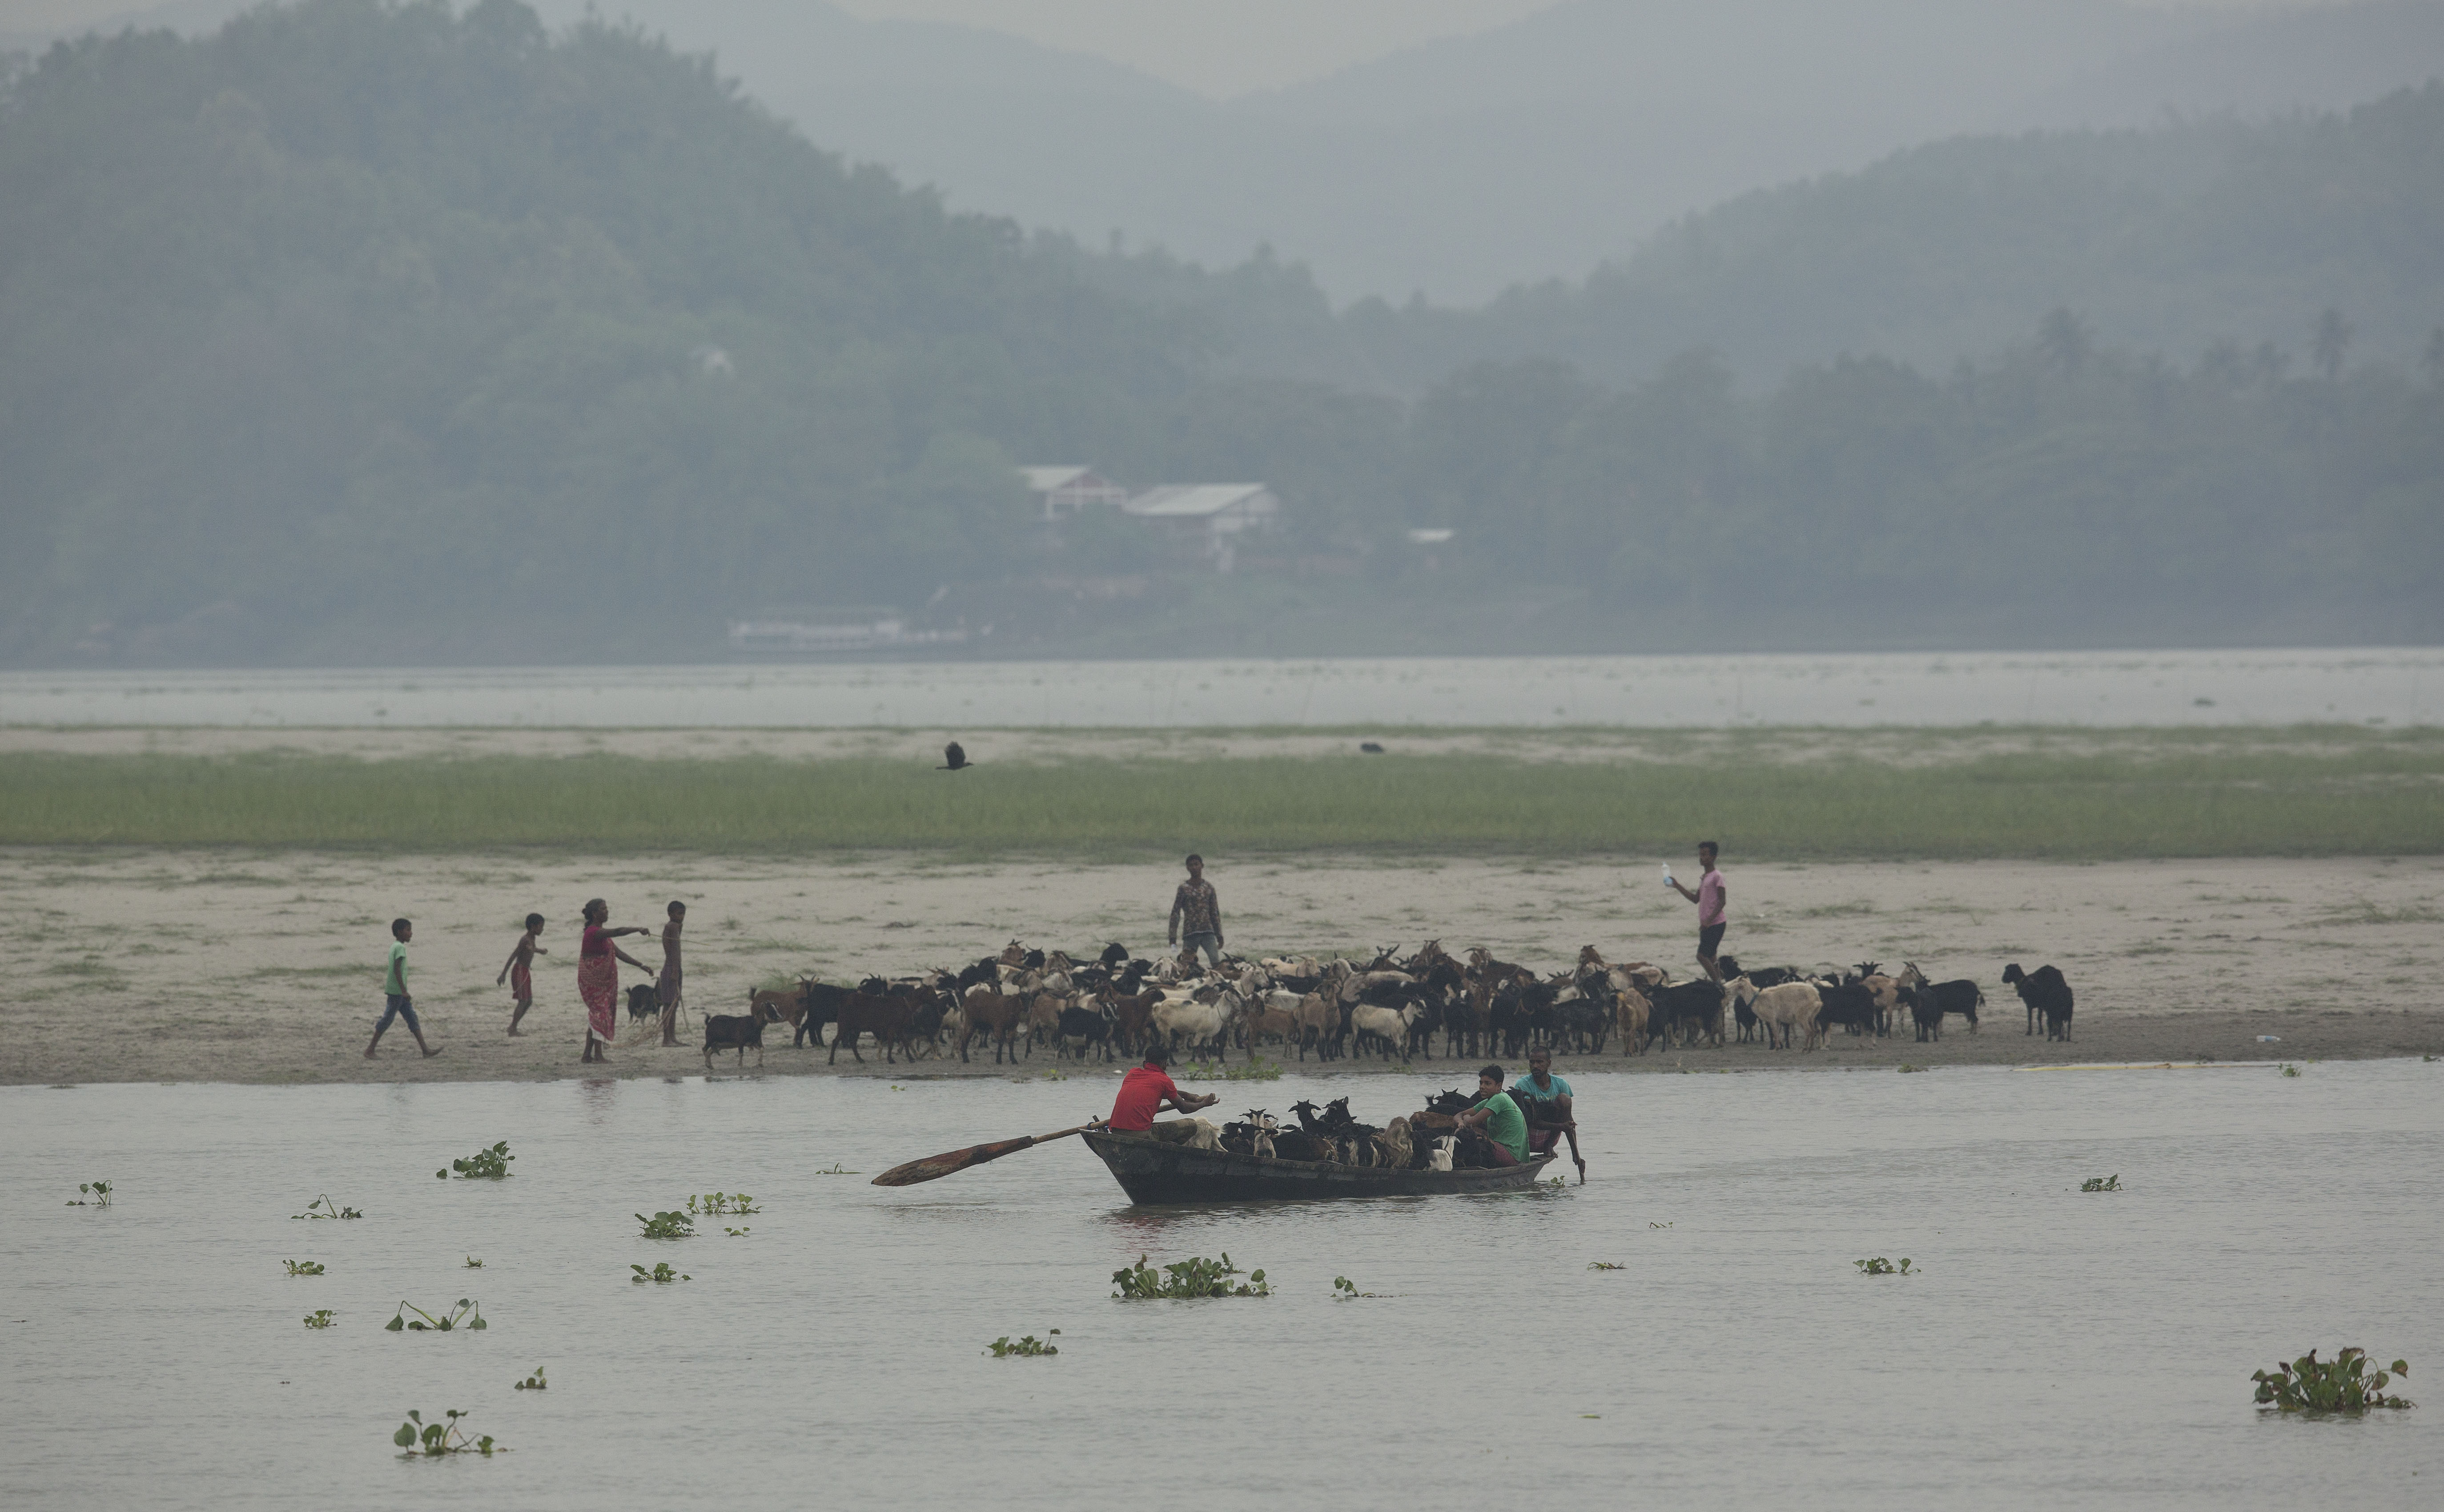 Locals shift their goats in a country boat to safer places after Cyclone Fani hit the coastal eastern state of Odisha, in river Brahmaputra in Gauhati, India, Friday, May 3, 2019. Cyclone Fani tore through India's eastern coast on Friday as a grade 5 storm, lashing beaches with rain and winds gusting up to 205 kilometers (127 miles) per hour and affecting weather as far away as Mount Everest as it approached the former imperial capital of Kolkata. (AP Photo/Anupam Nath)